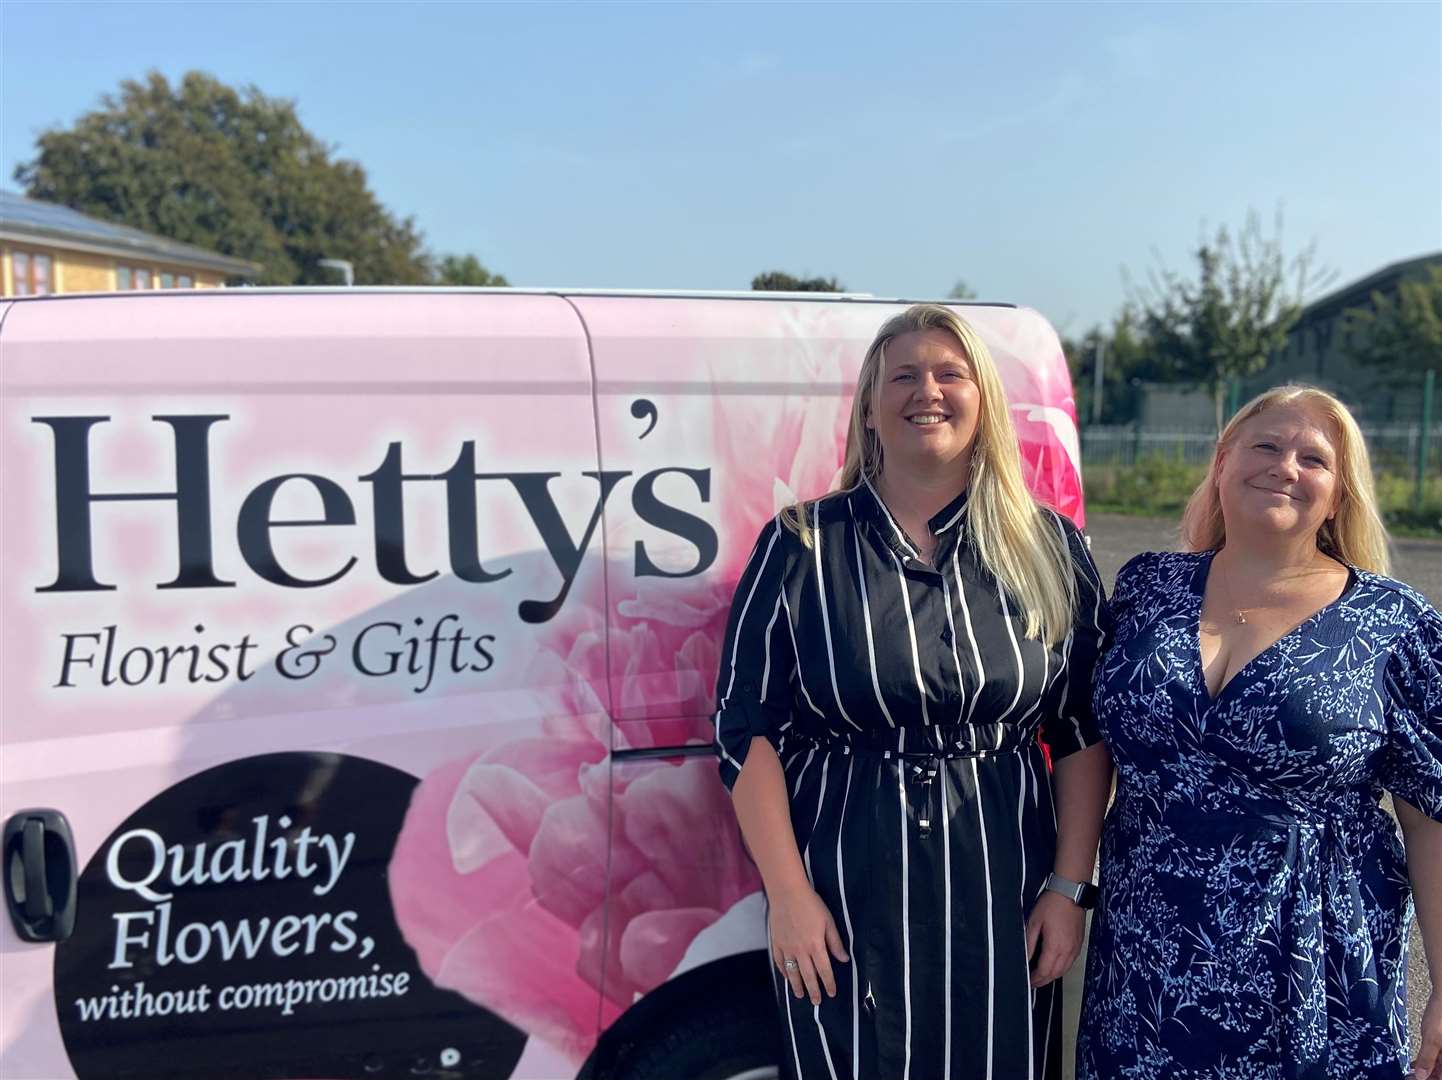 Mother-and-daughter Molly and Mandy Davis hope Hetty's Florist can be an "uplifting and positive addition to Canterbury”